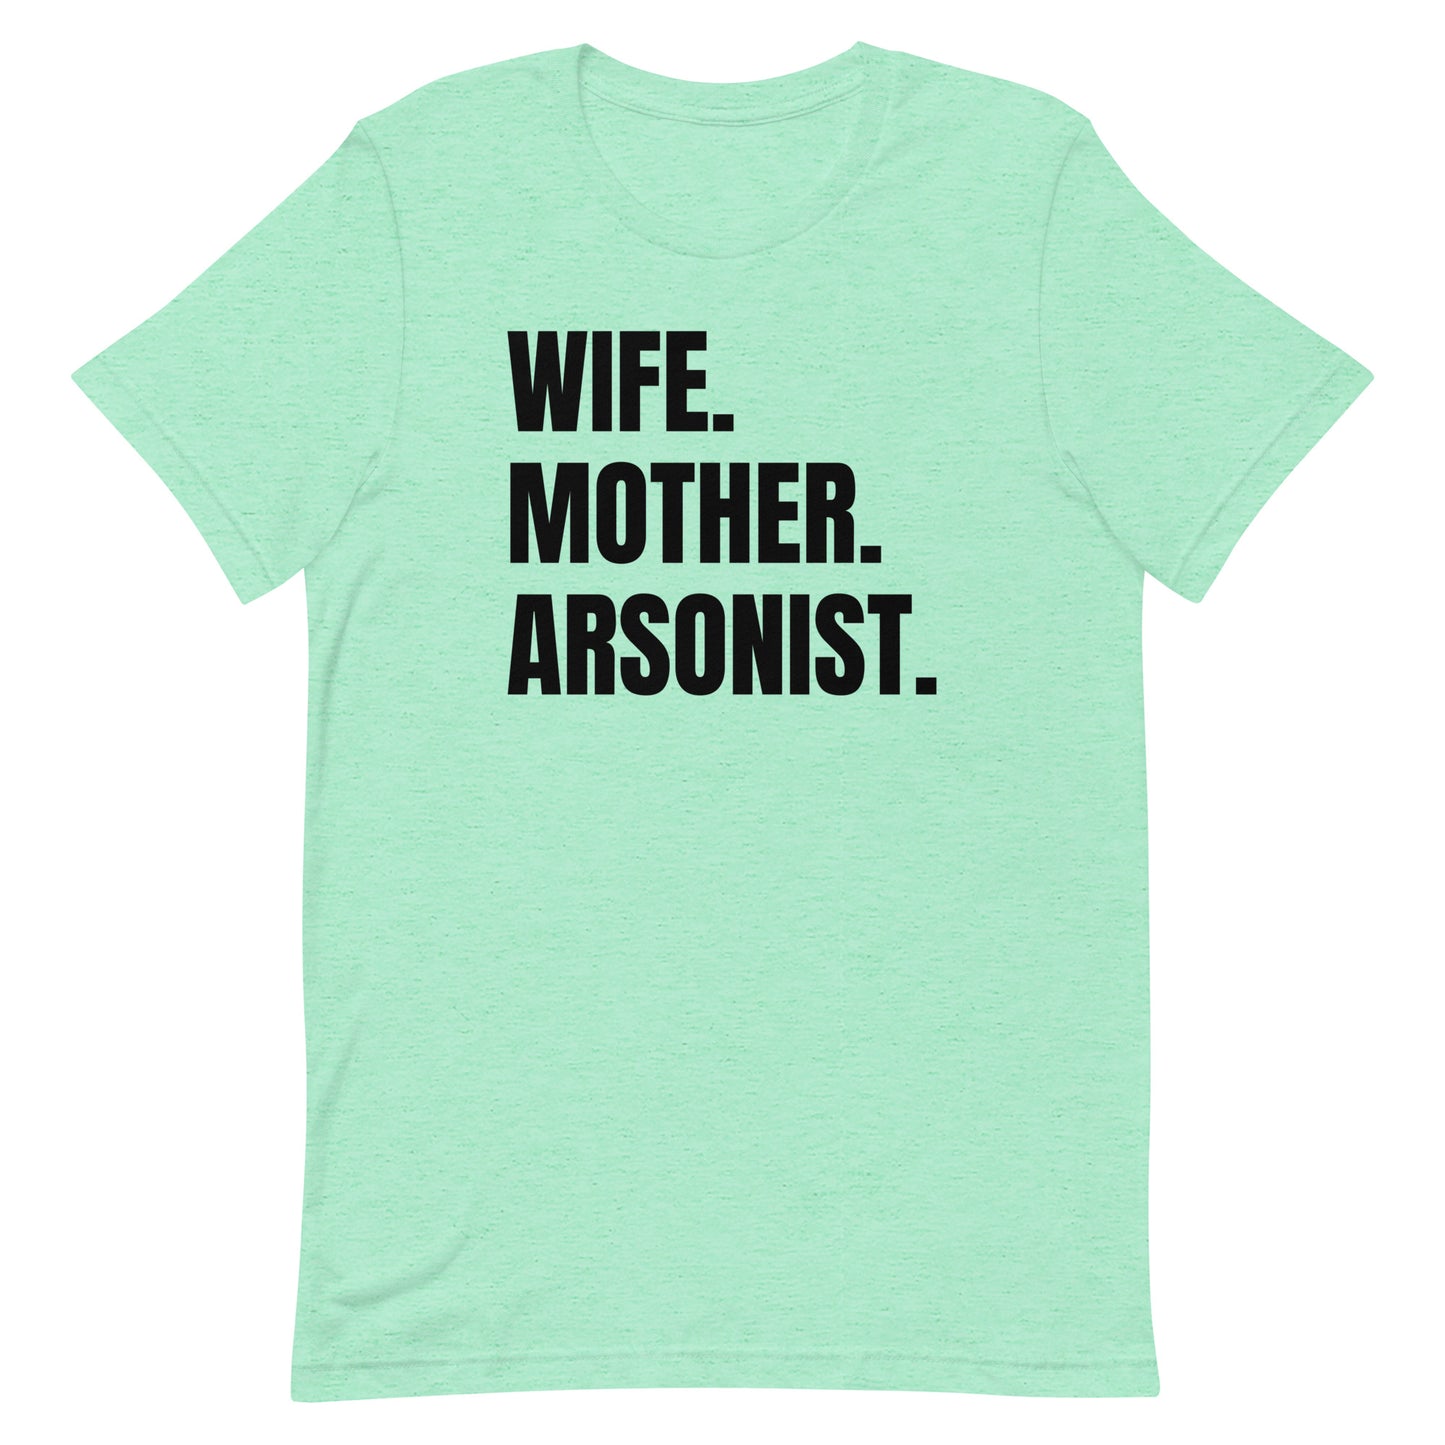 Wife. Mother. Arsonist. Unisex t-shirt